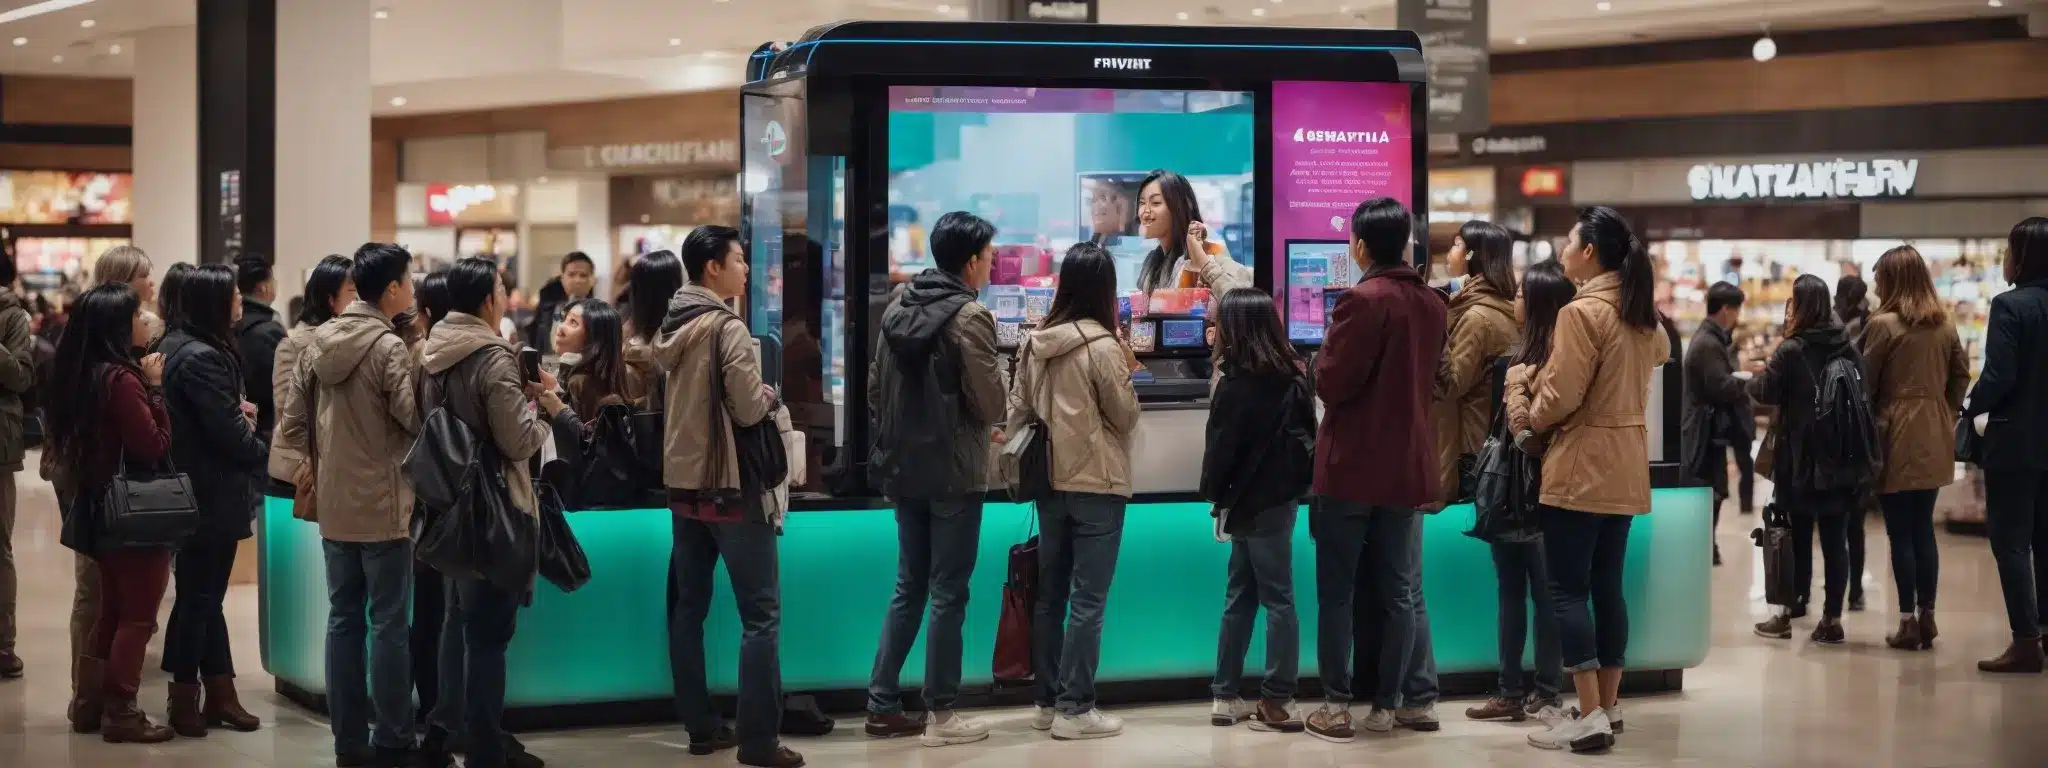 Customers Gather Around An Interactive Kiosk Displaying A Colorful And Engaging Loyalty Program Promotion Inside A Bustling Shopping Center.